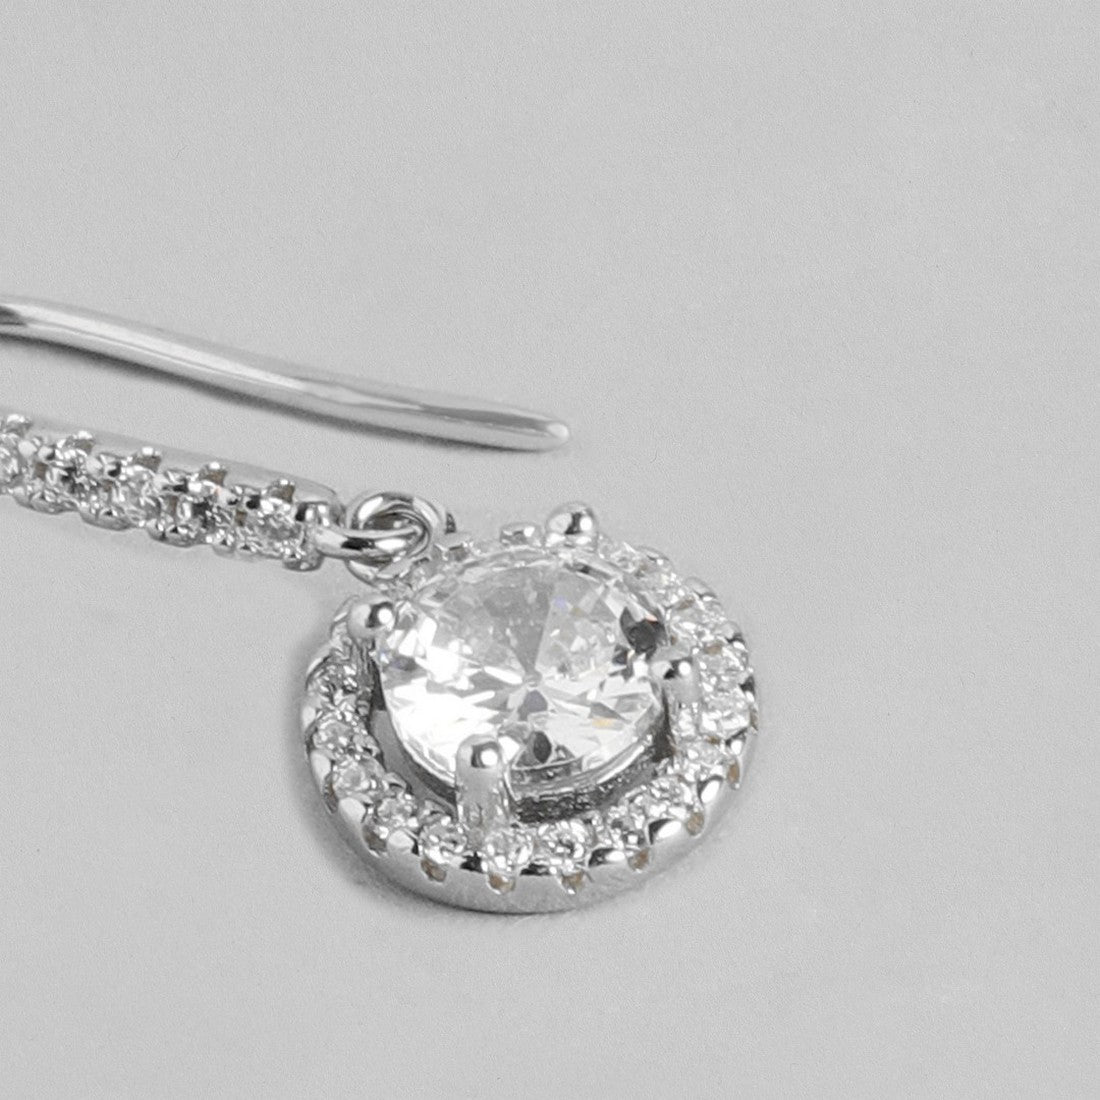 Solitary Romance 925 Sterling Silver Combo - Valentines Edition With Gift Box